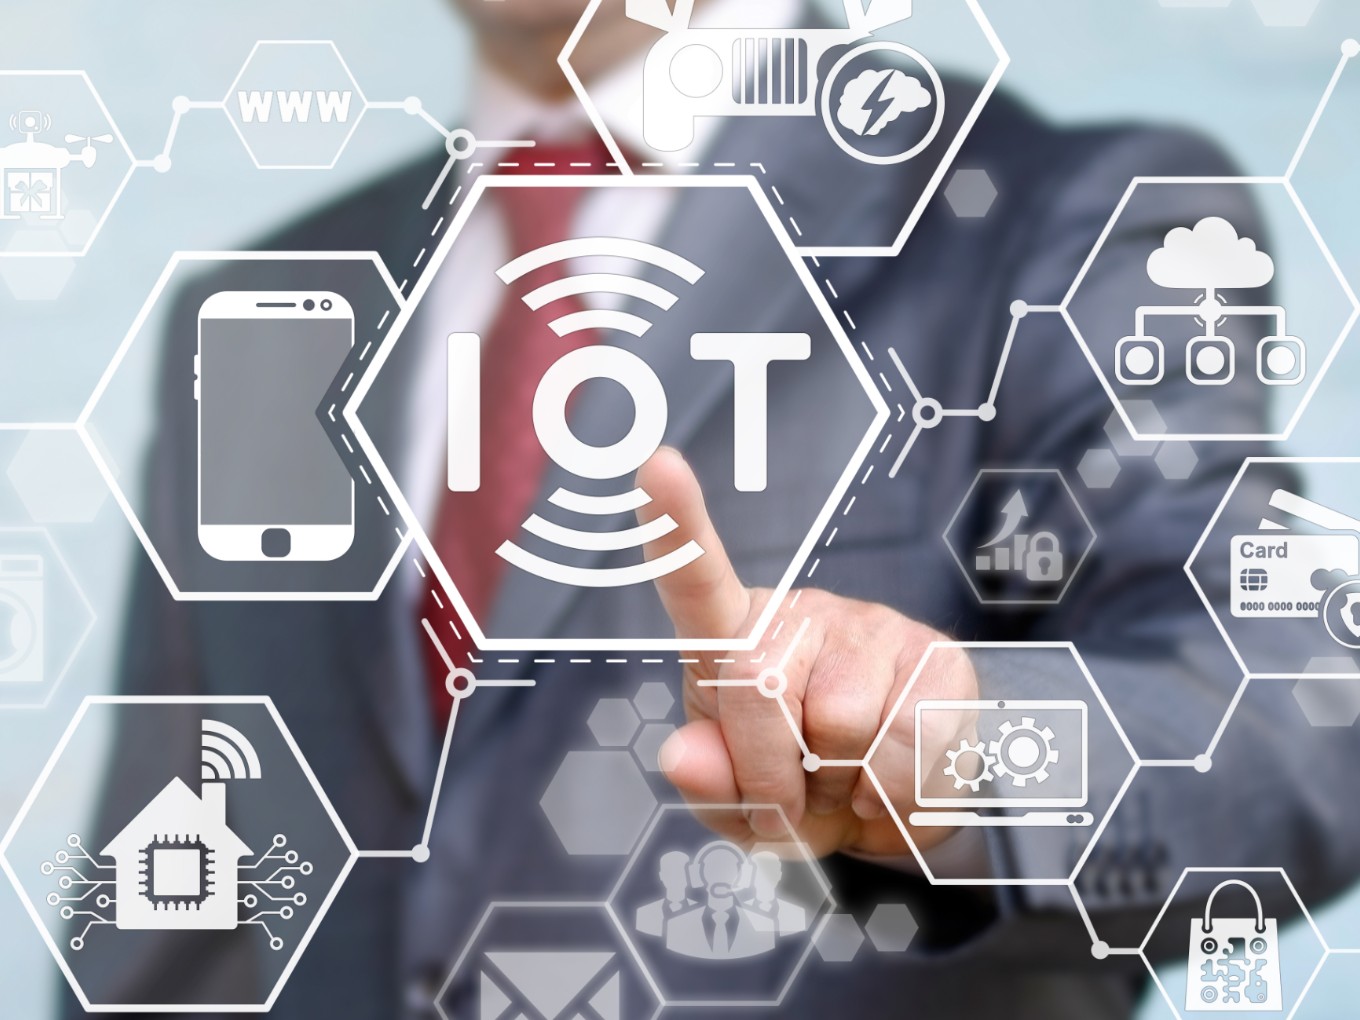 IoT: The New Money Maker For Startups In 2019 And Beyond